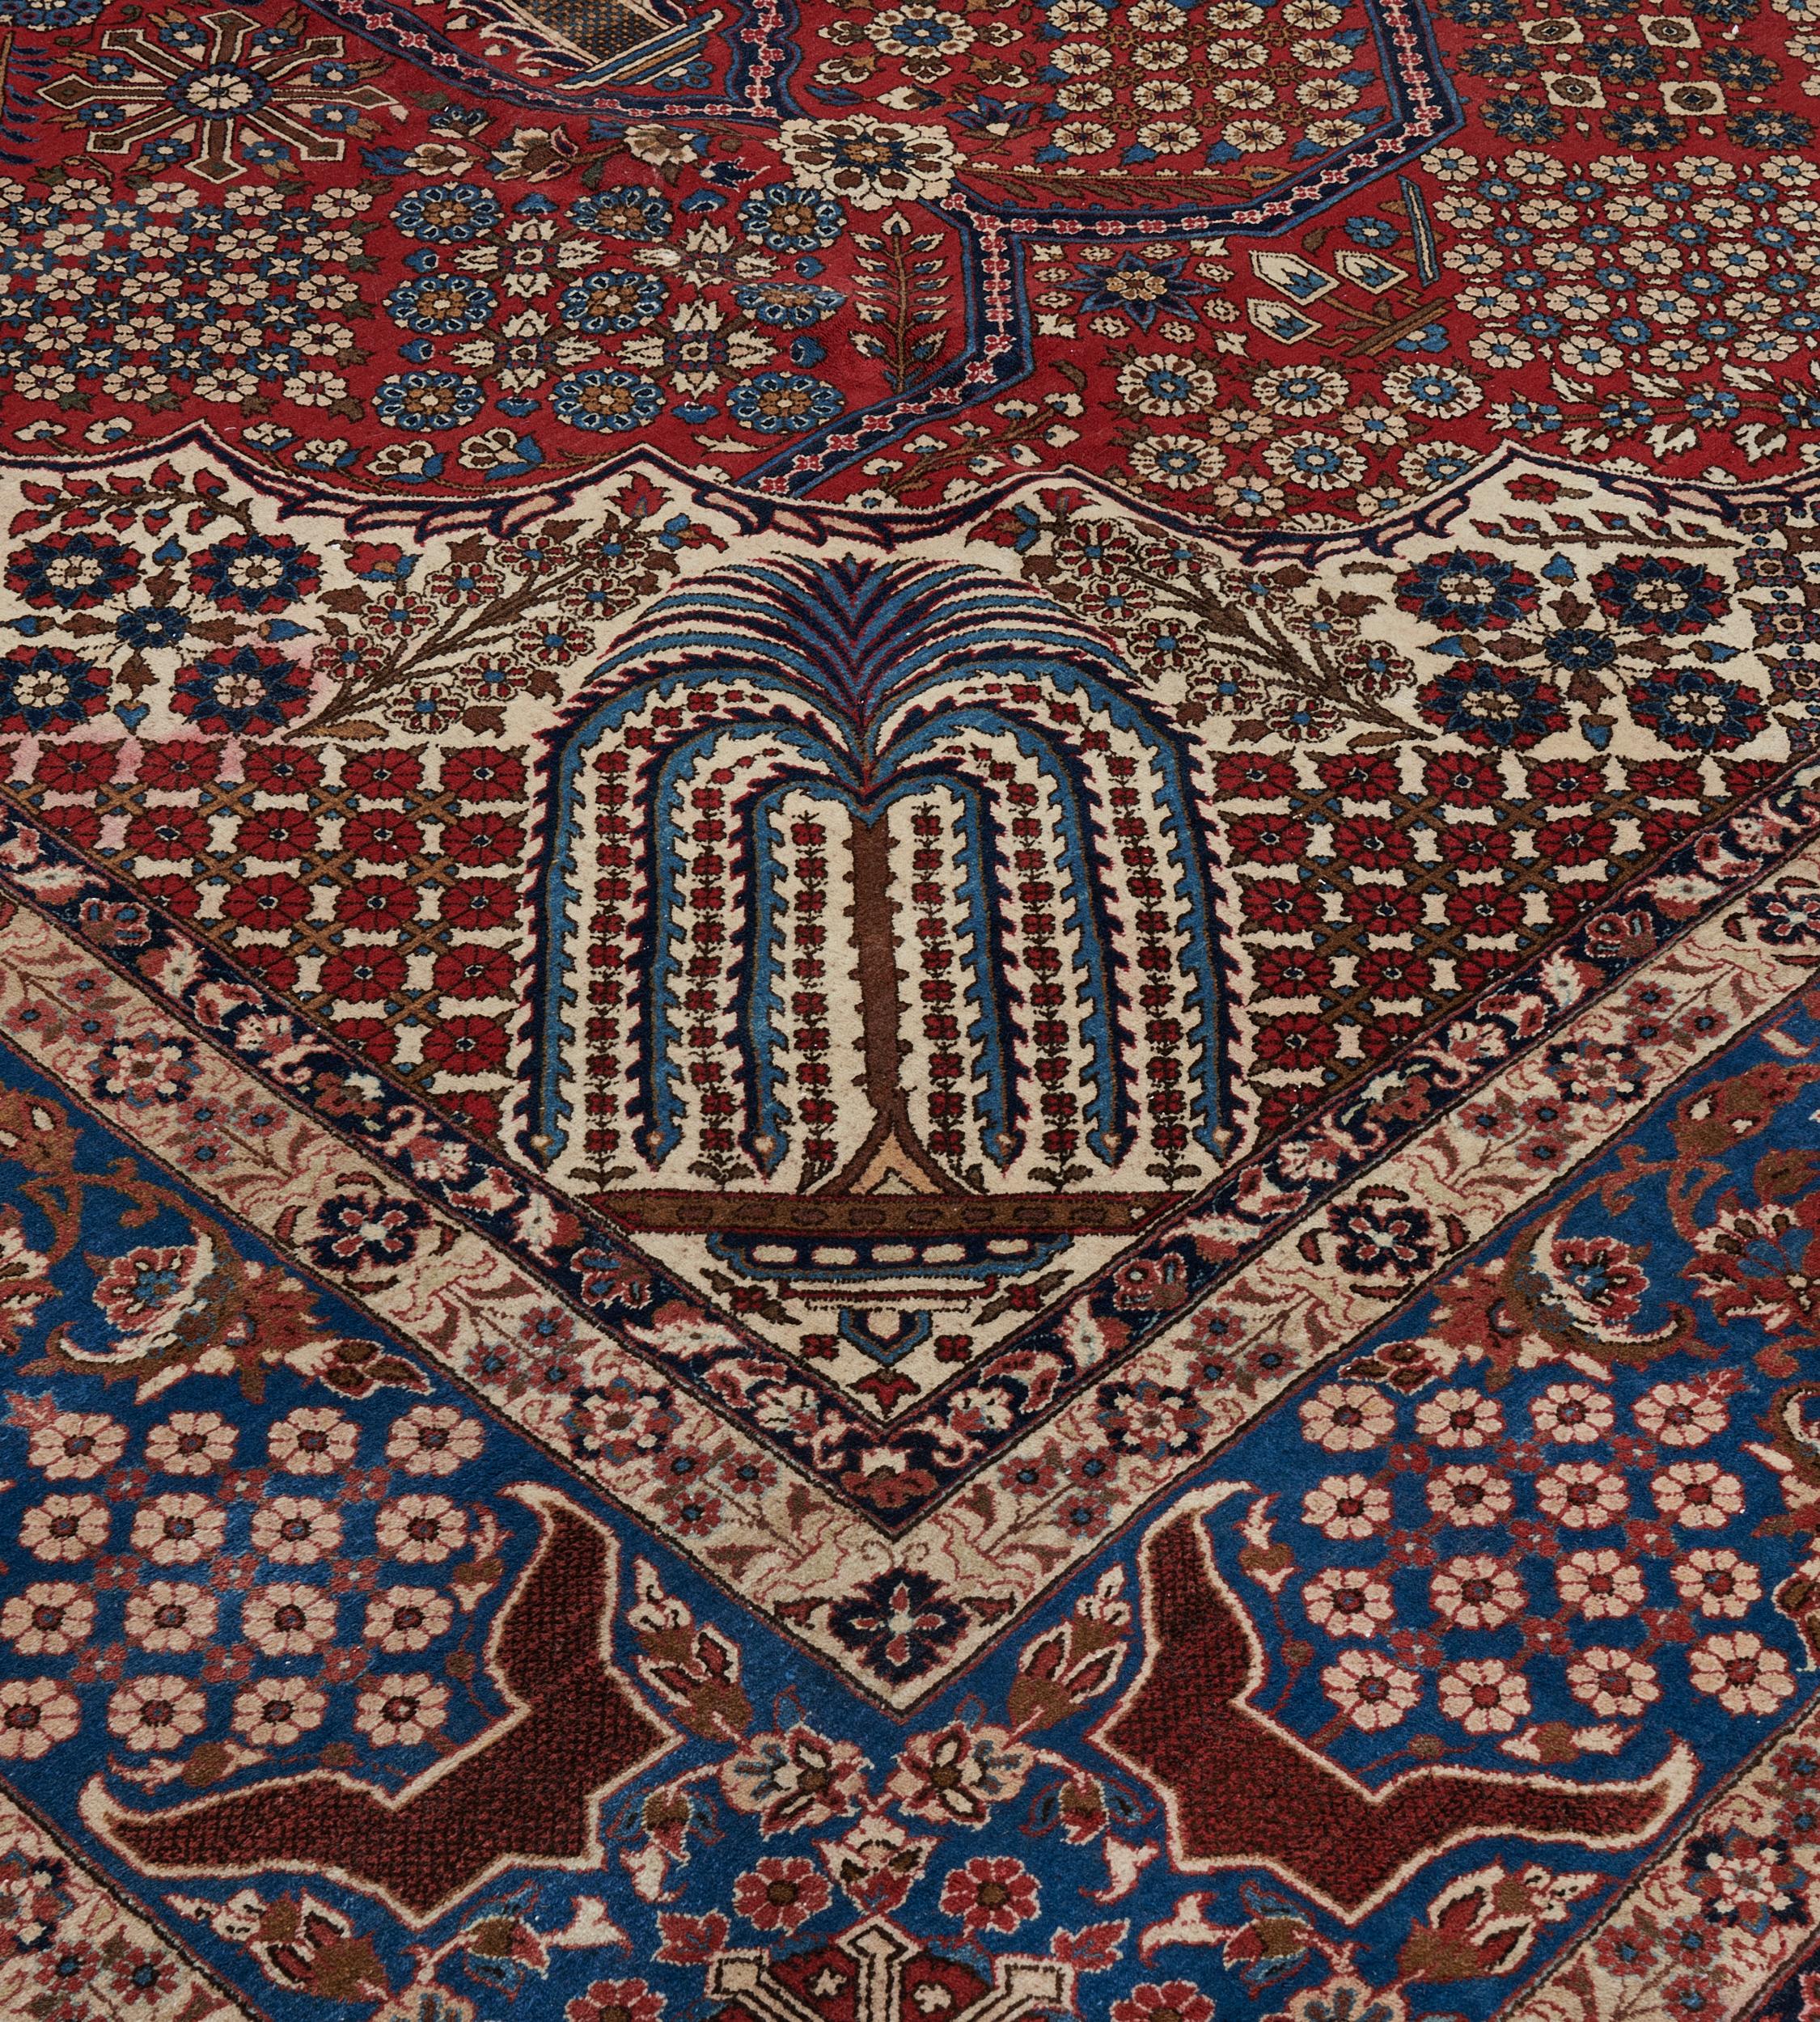 This traditional, circa 1940, hand-woven Persian Isfahan has a tomato-red field with a central indigo-blue cusped medallion with palmette pendants containing a dense profusion of flowerheads and a pair of weeping willows surrounded by open lozenges